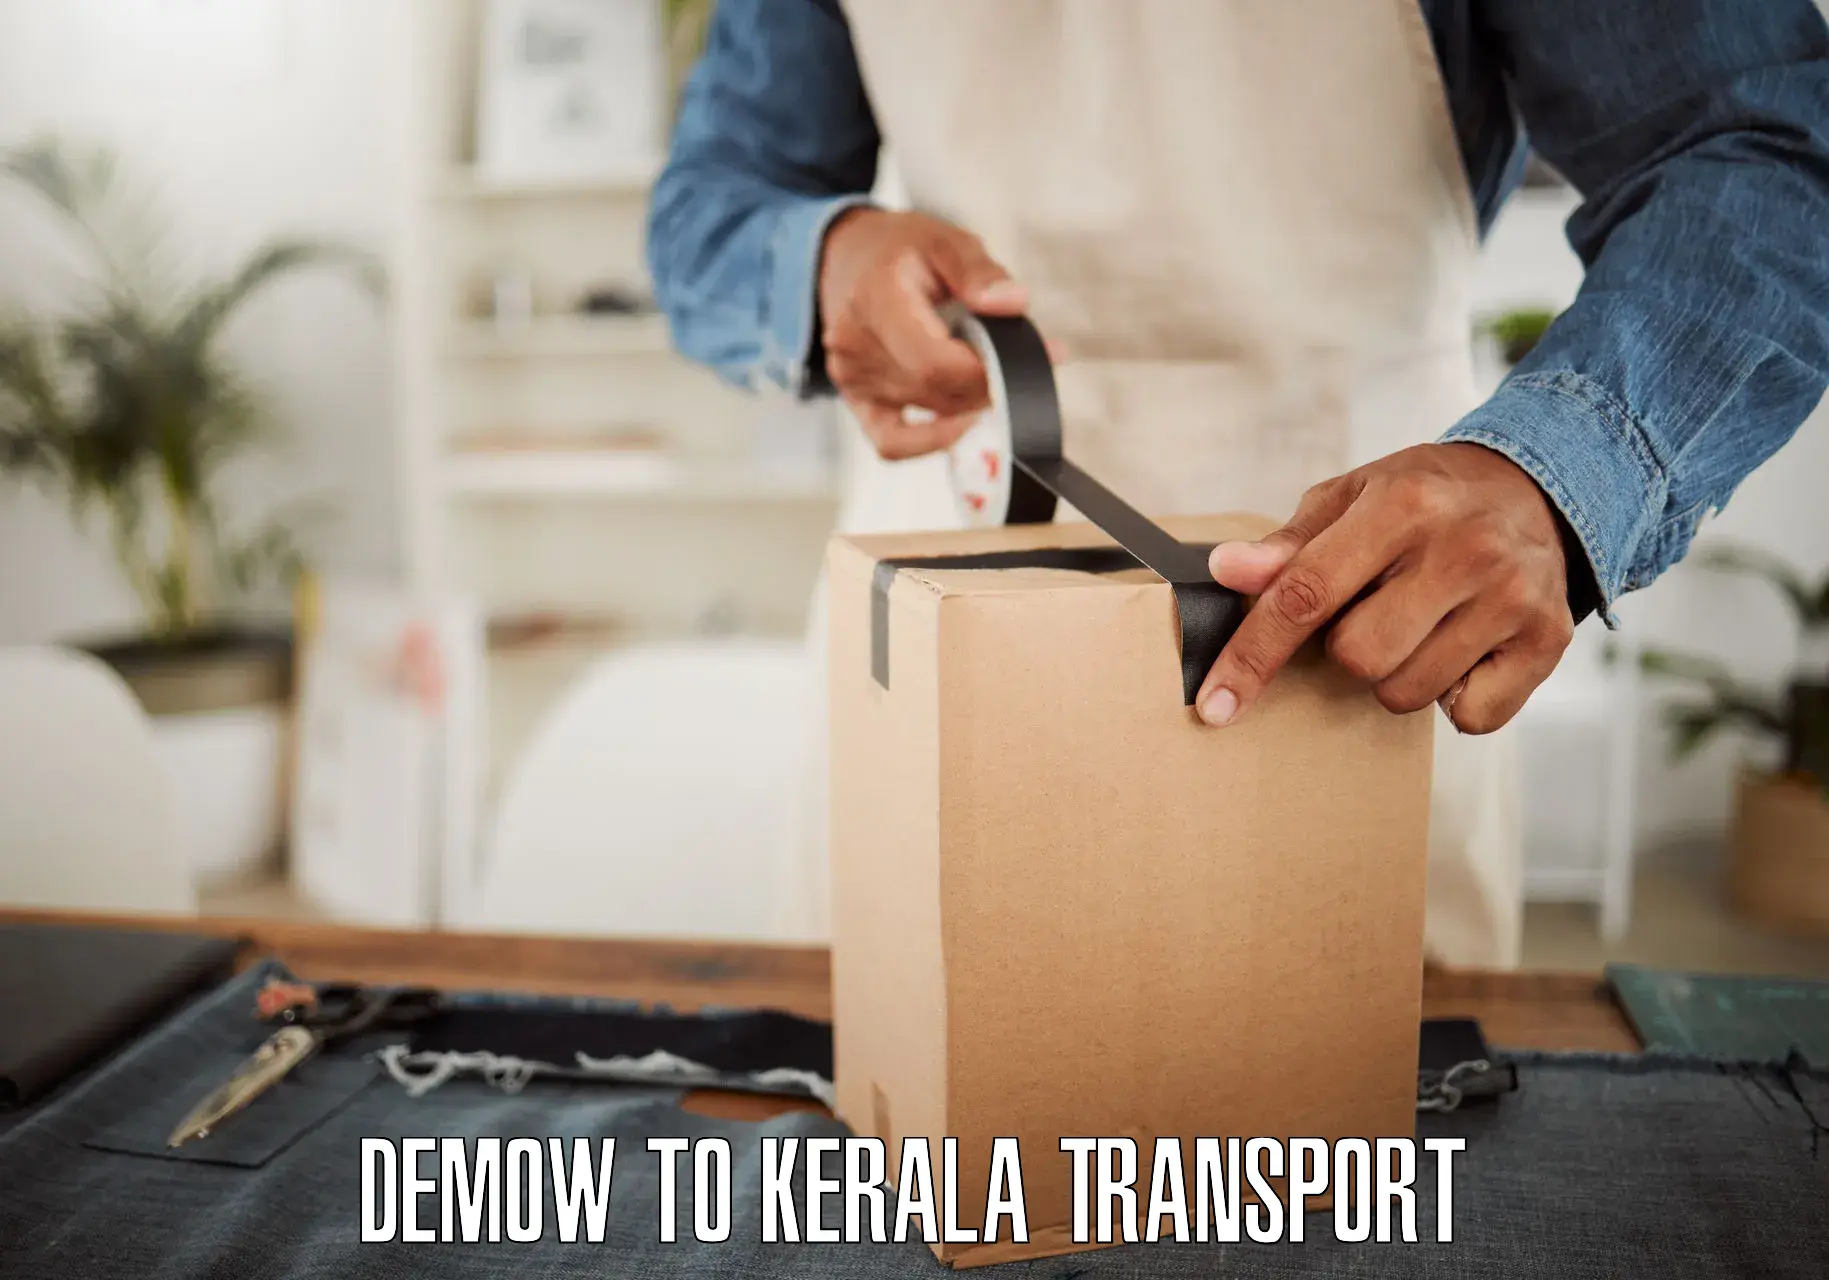 Shipping services Demow to Kerala